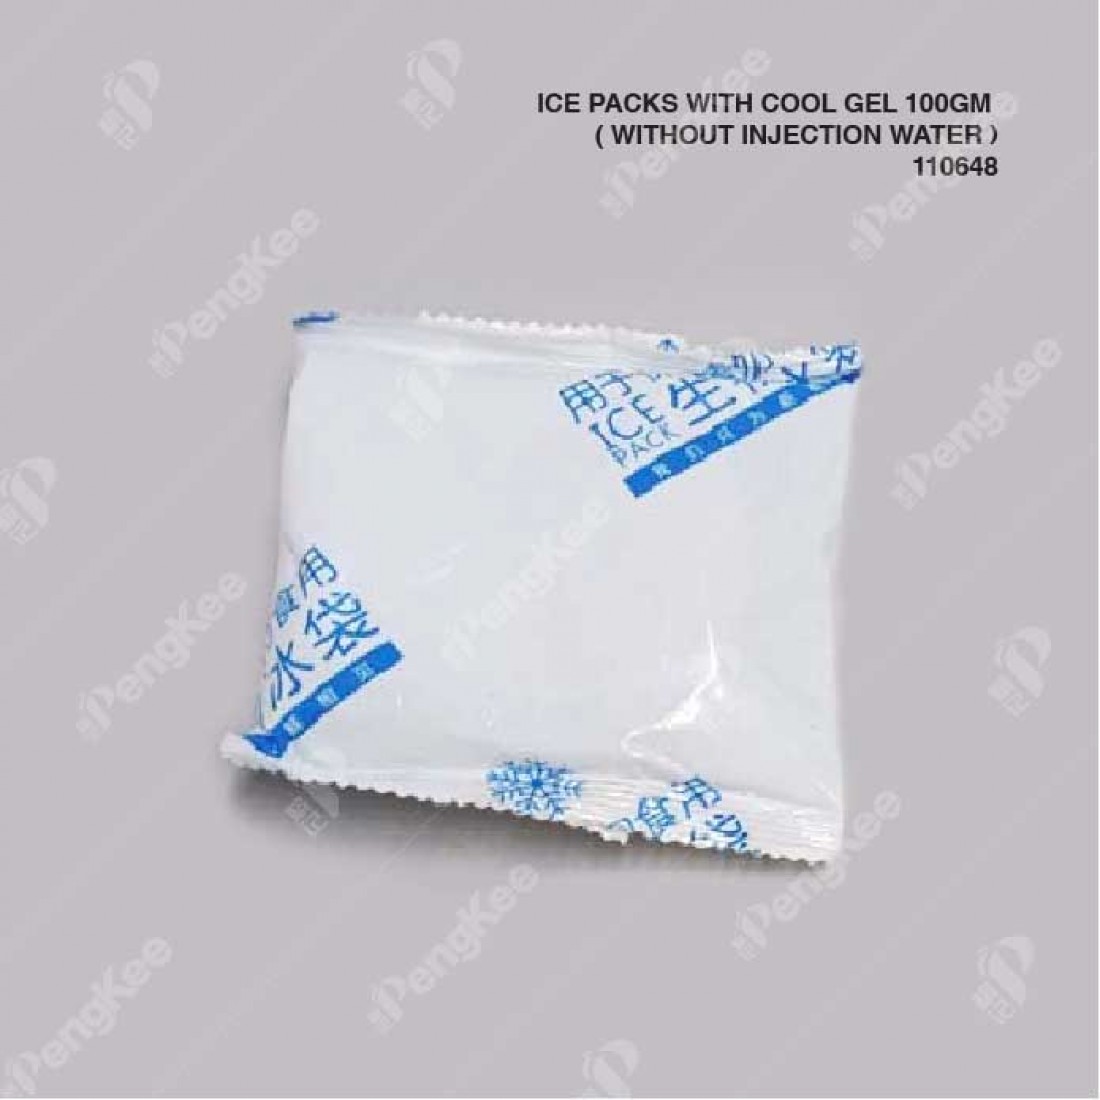 ICE PACKS WITH COOL GEL ( WITHOUT INJECTION WATER) 100GM